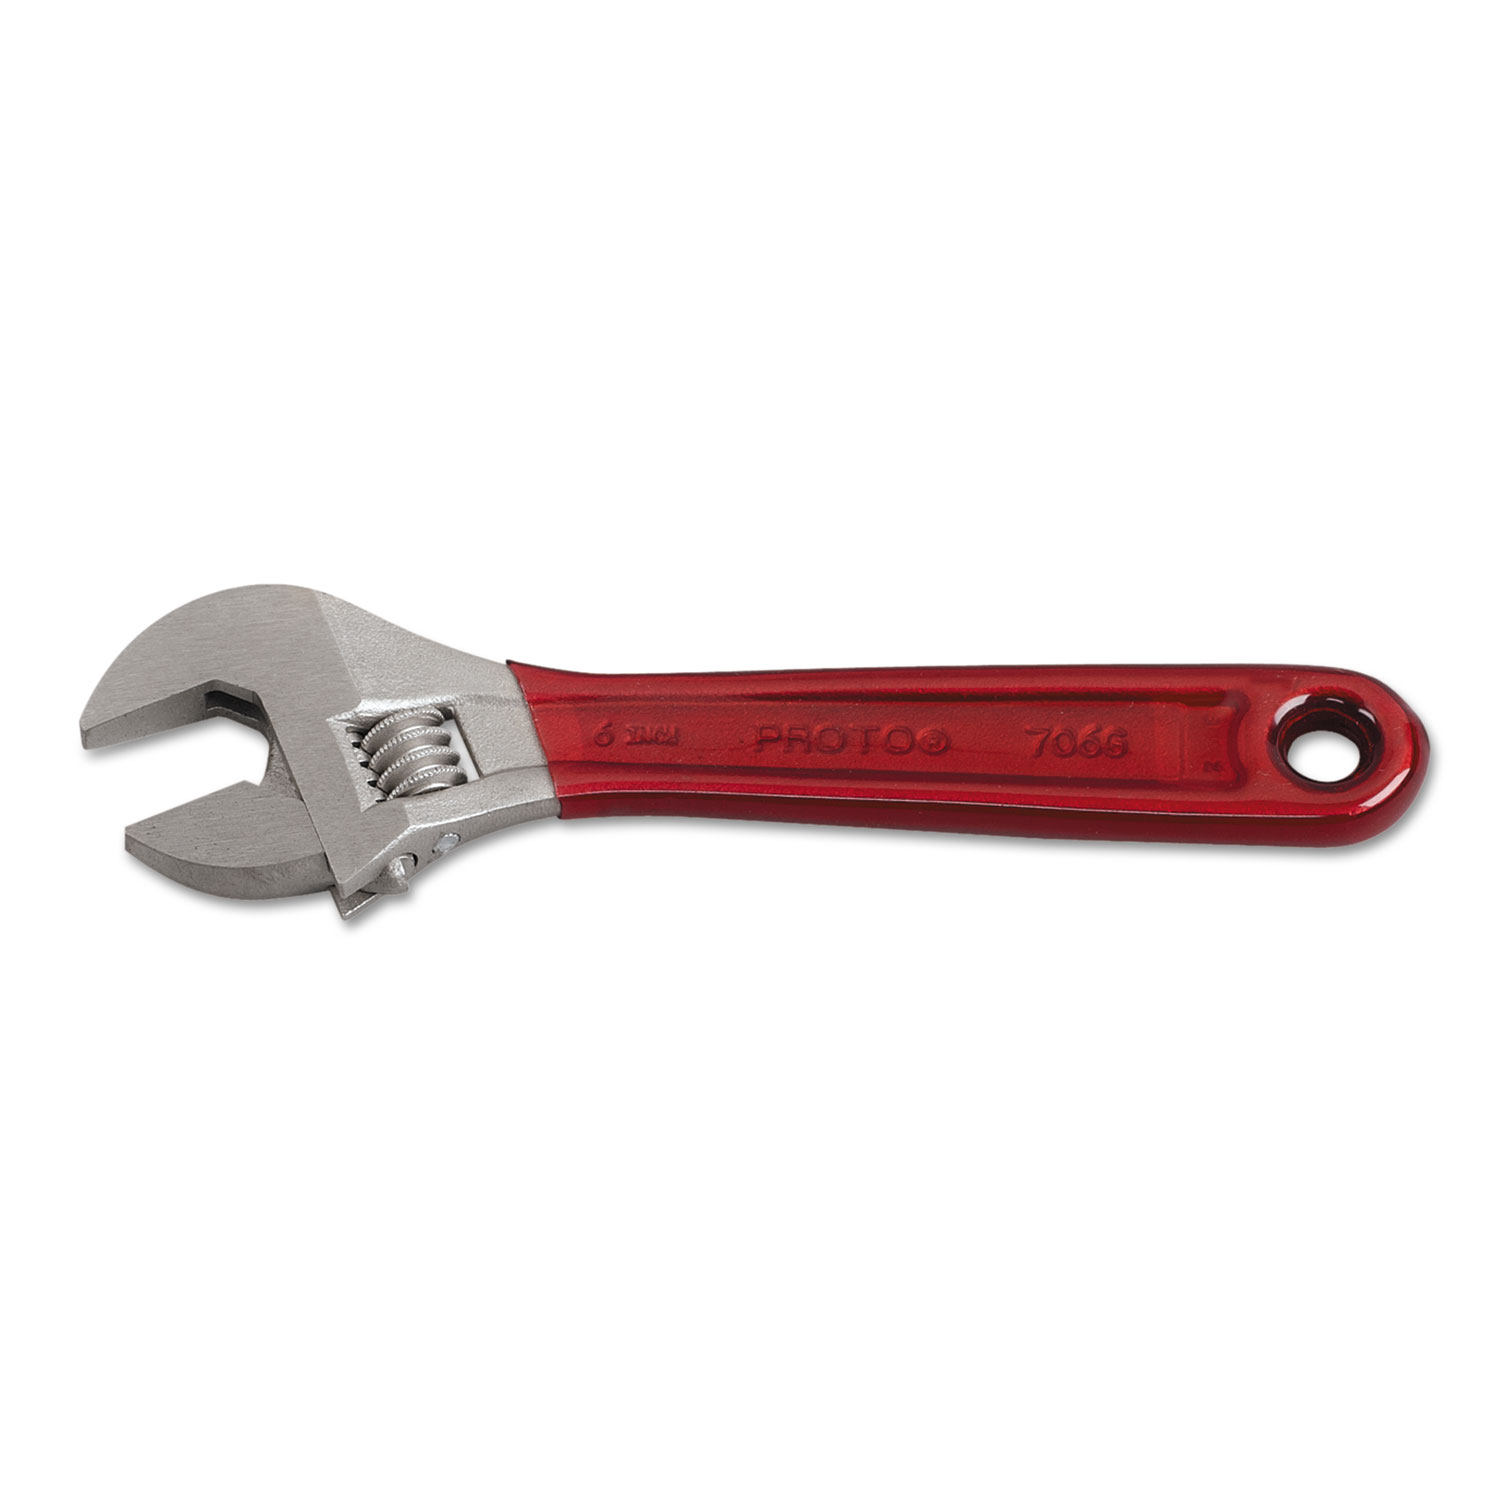 Adjustable Wrench, Cushion Grip. 6 Long